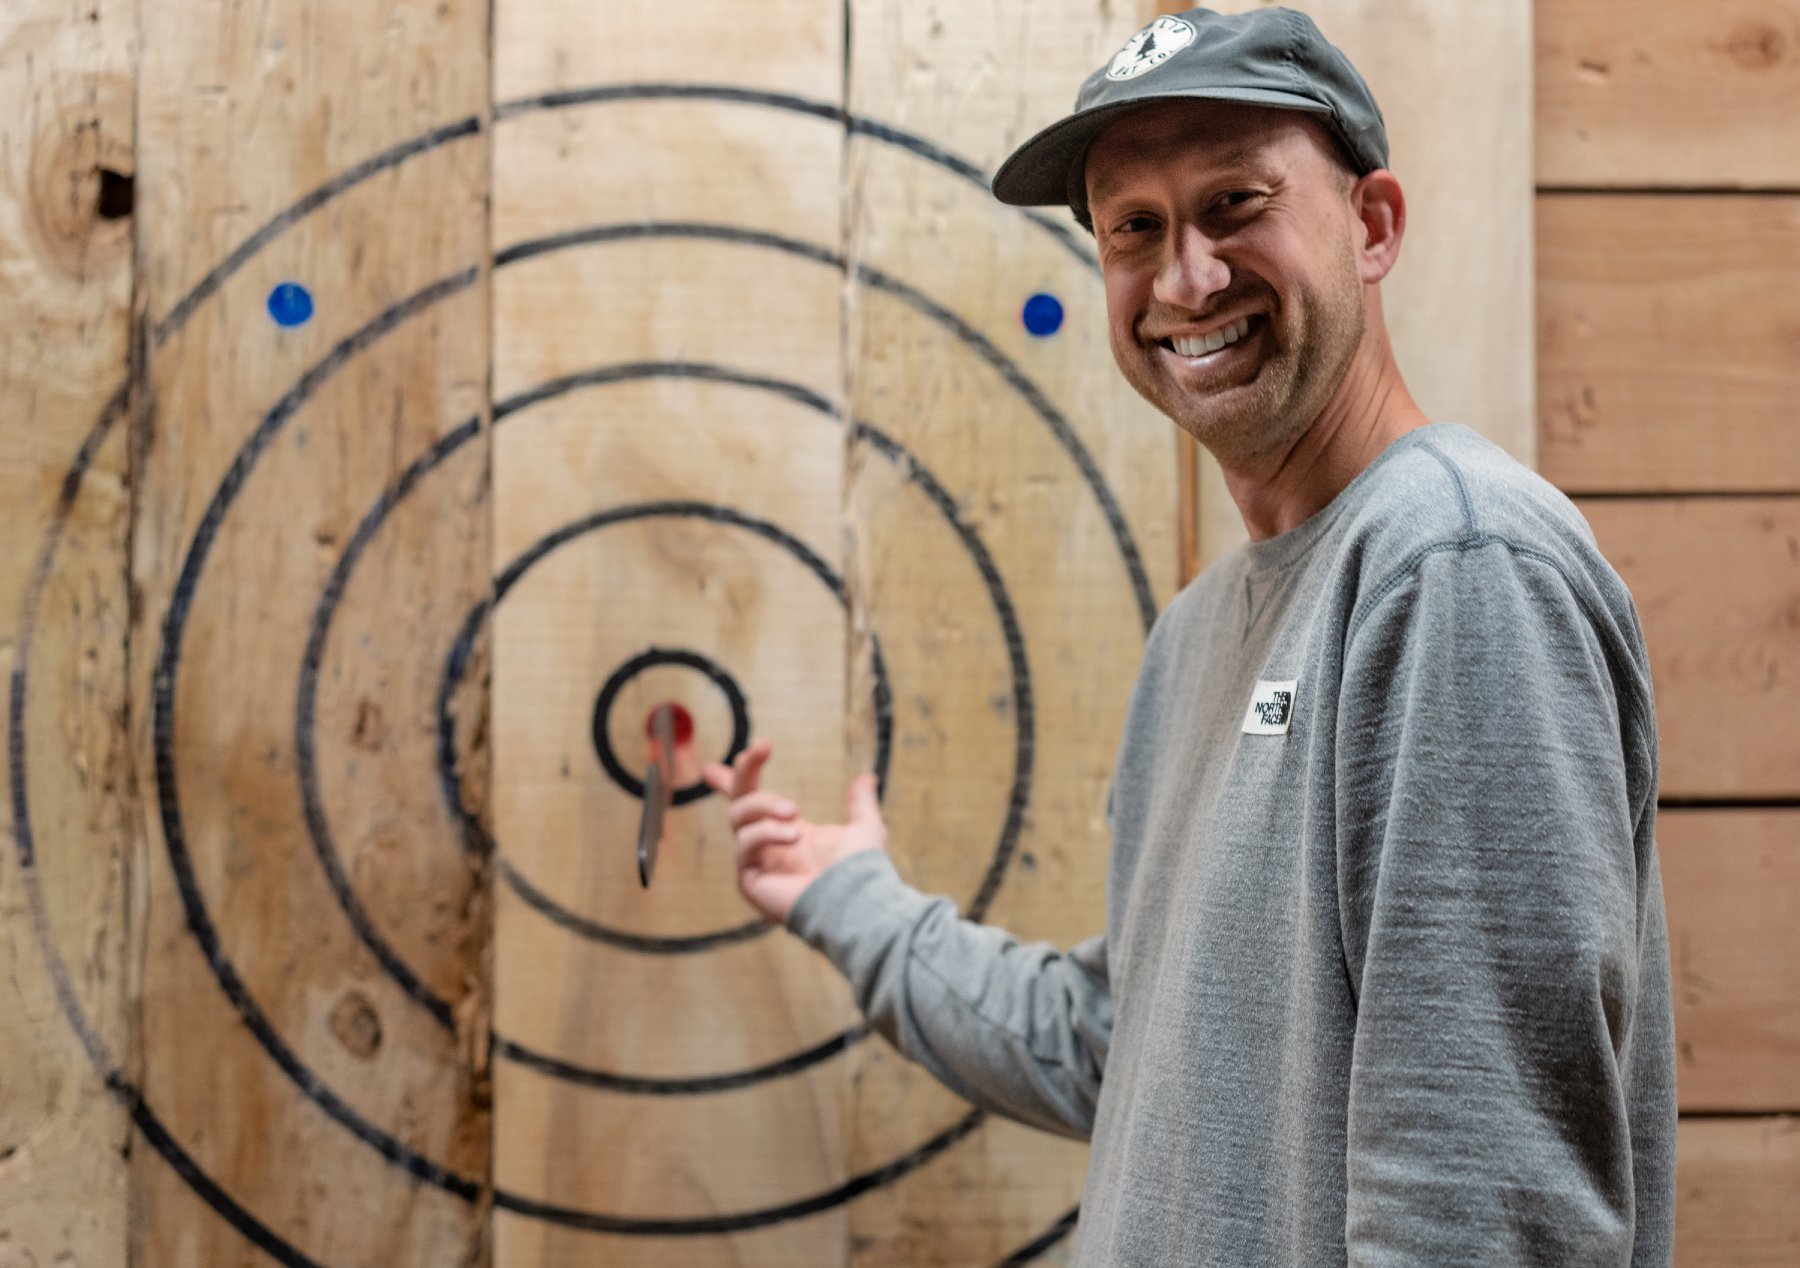 A man points to his knife in a bullseye.